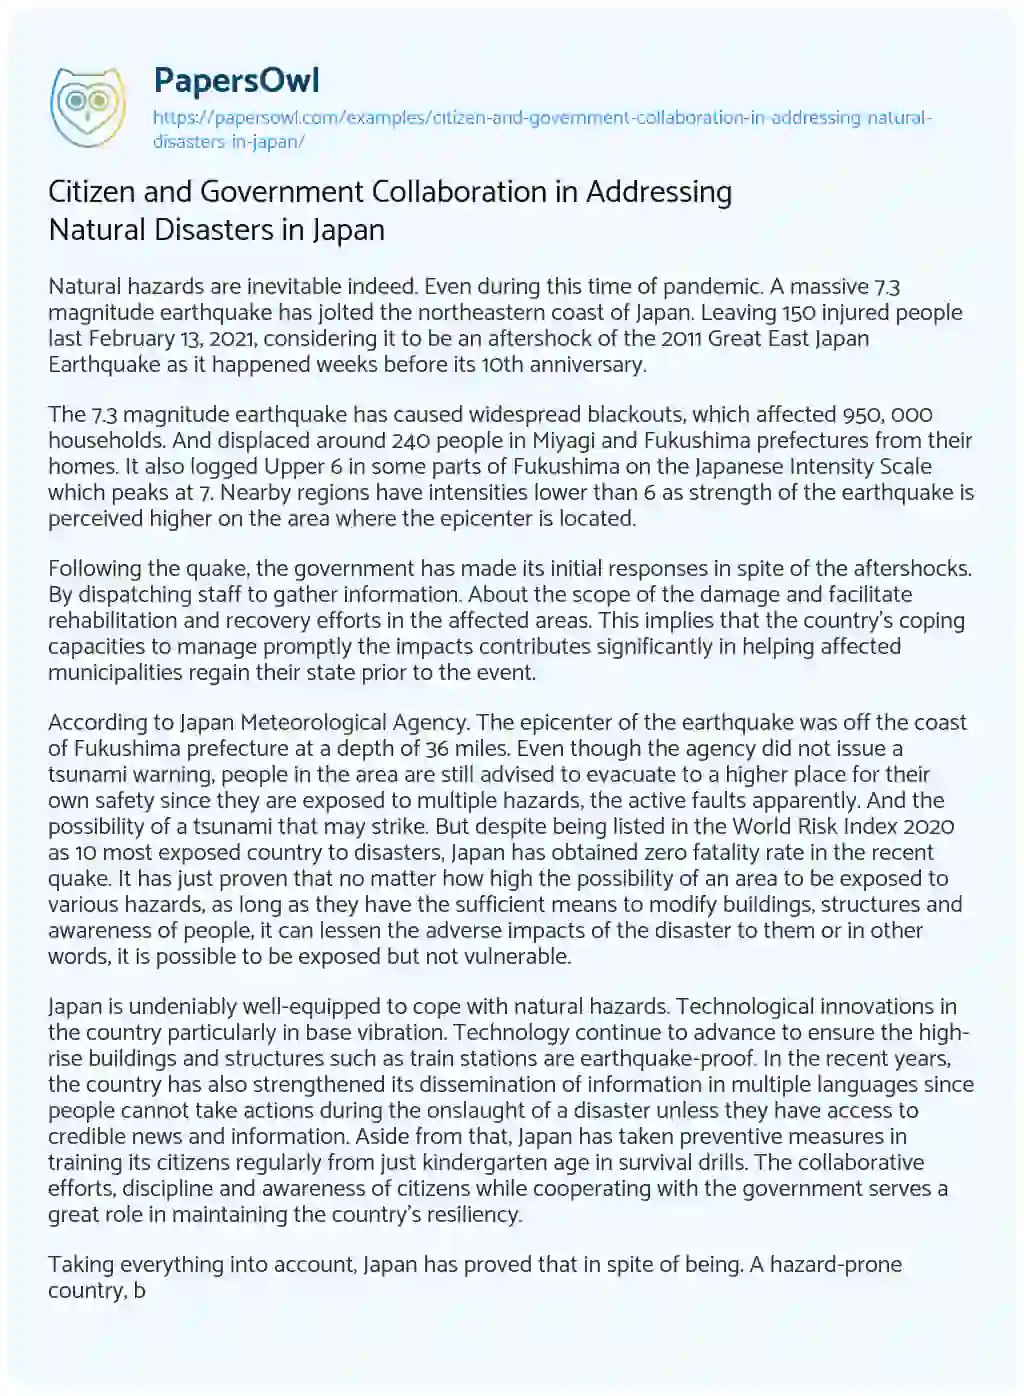 Essay on Citizen and Government Collaboration in Addressing Natural Disasters in Japan